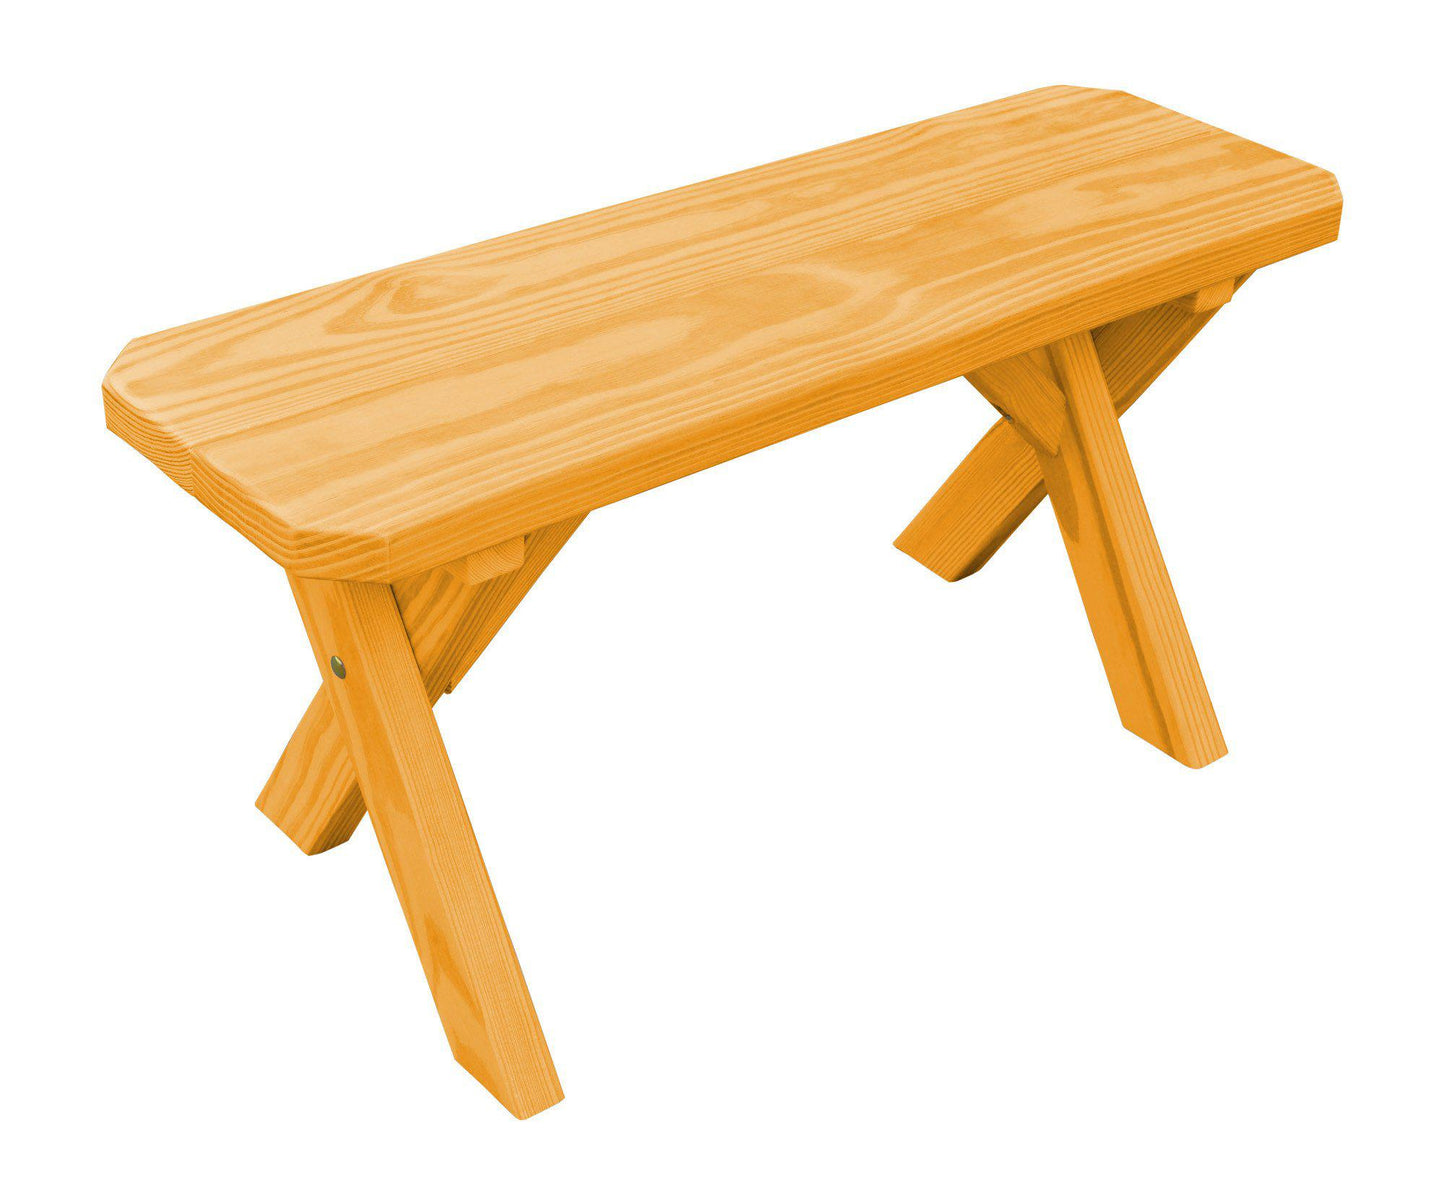 A&L Furniture Co. Yellow Pine 33" Crossleg Bench Only - LEAD TIME TO SHIP 10 BUSINESS DAYS